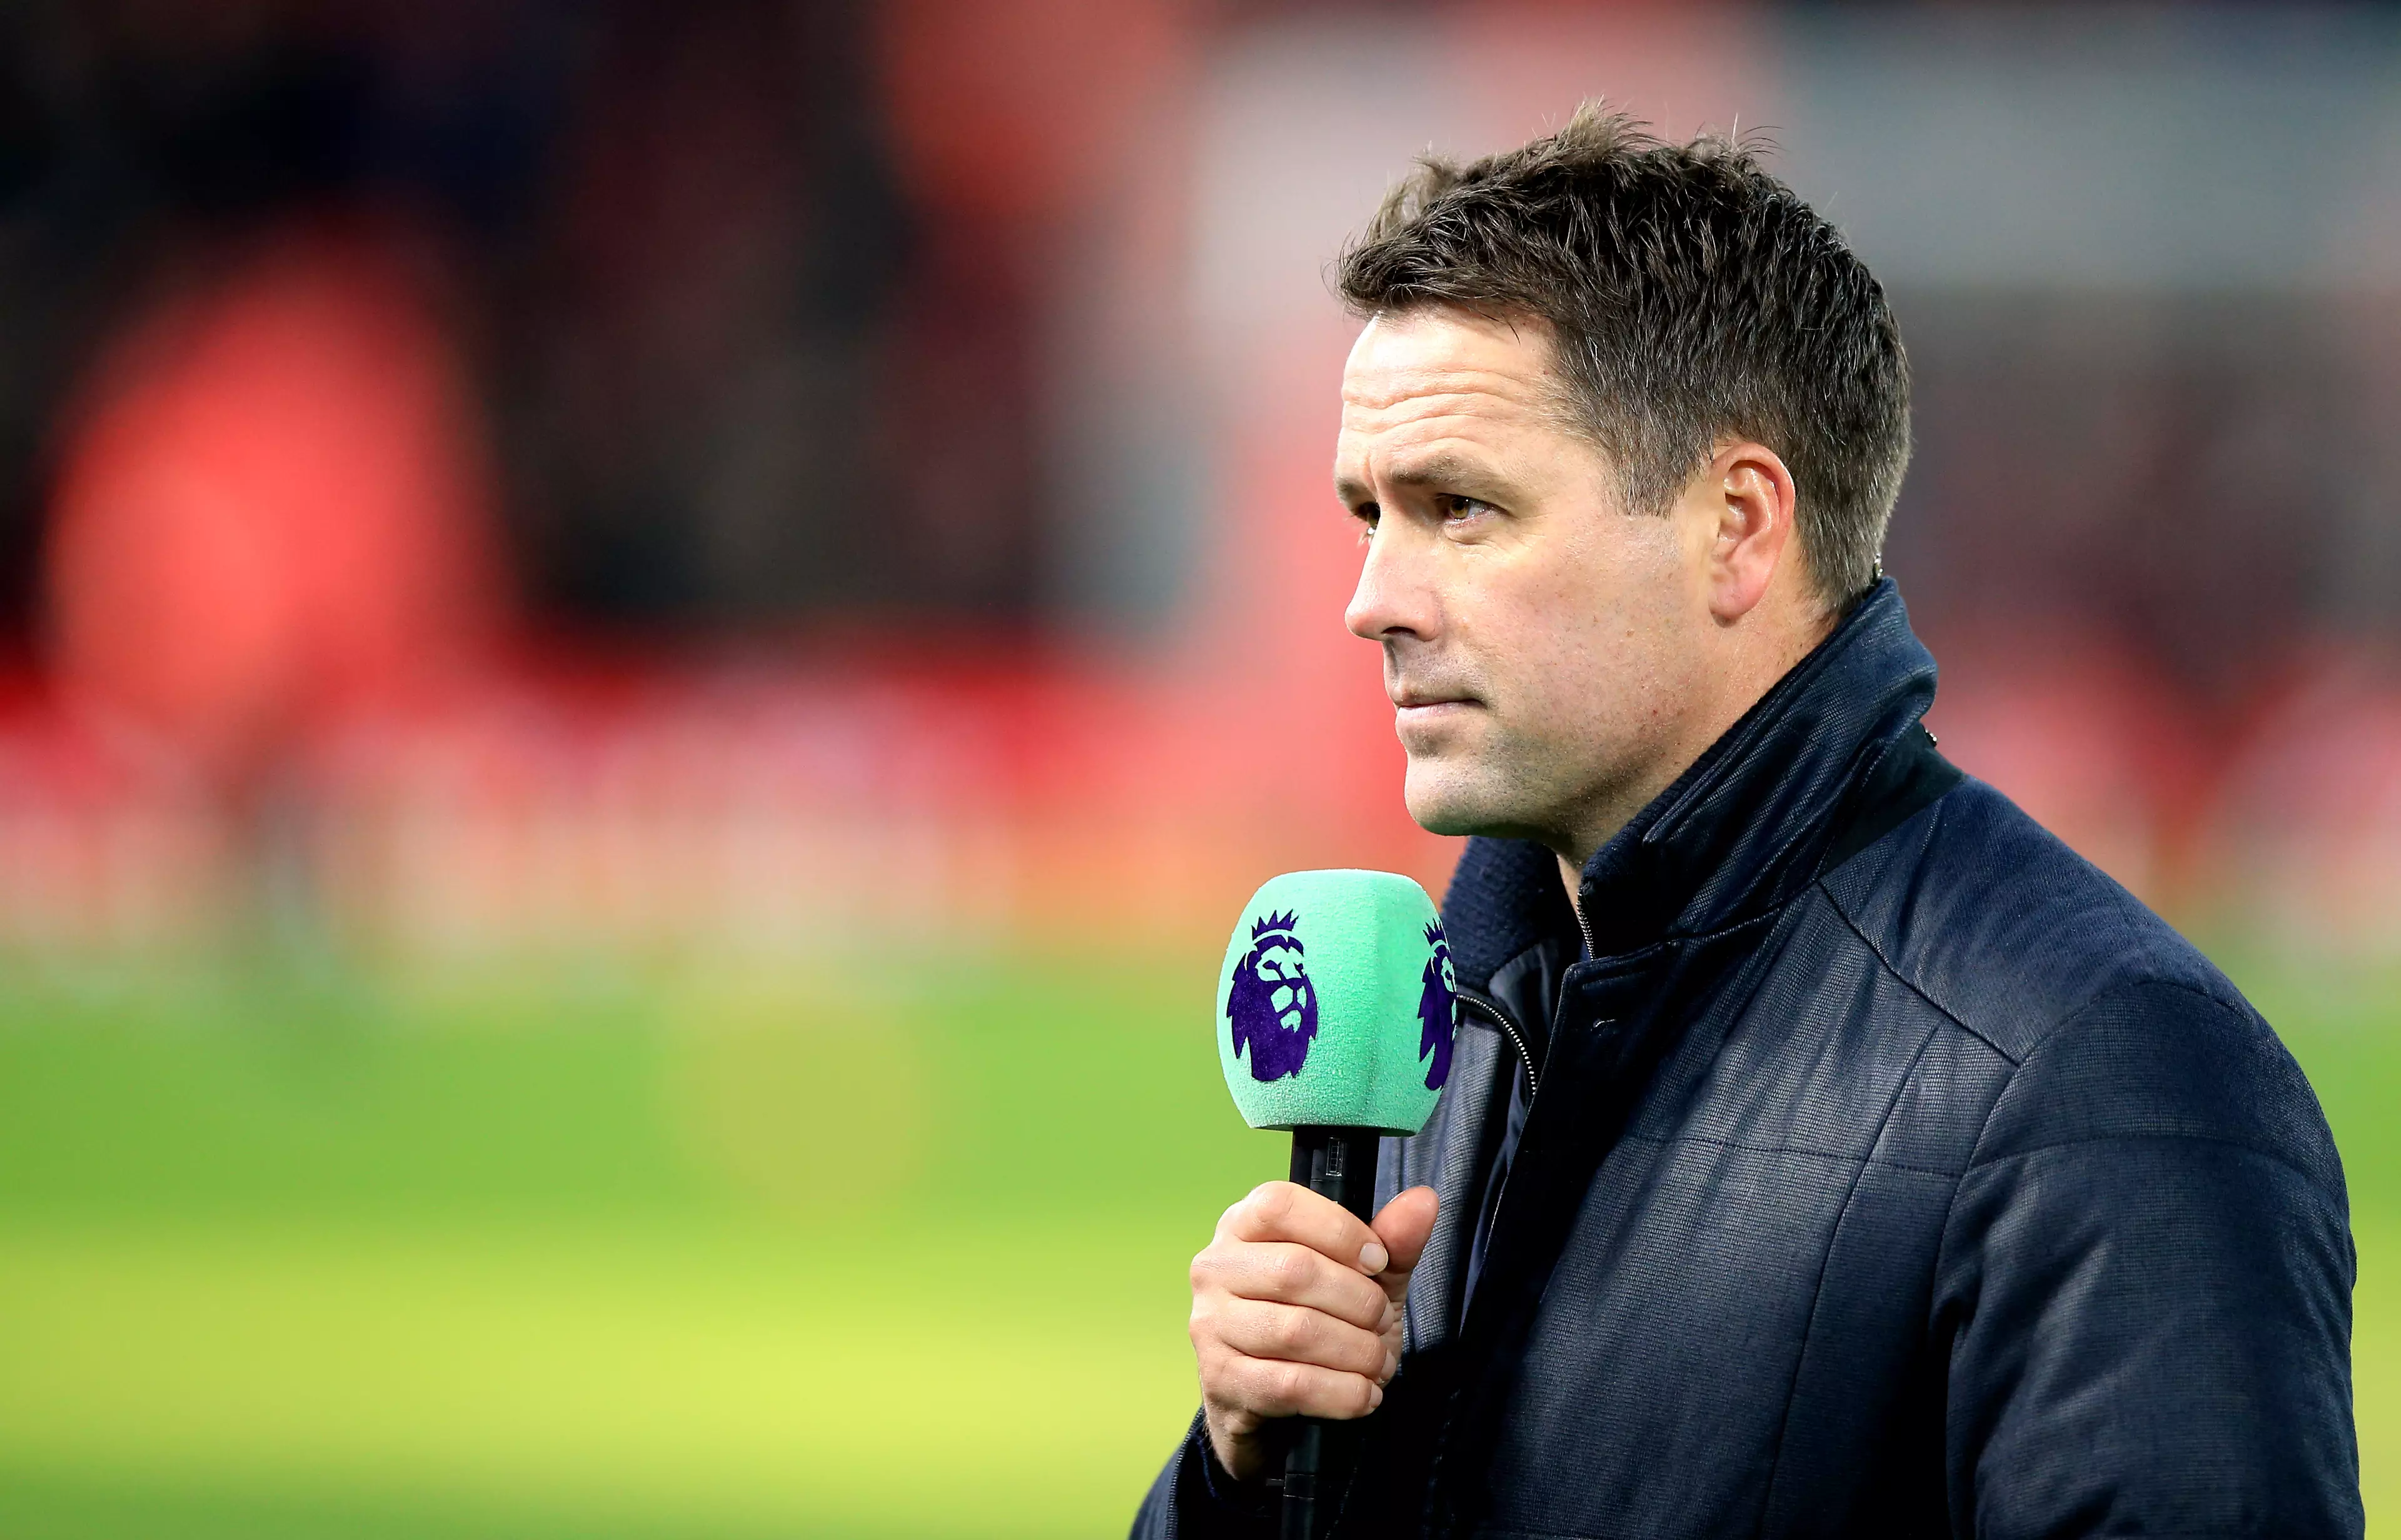 Michael Owen is the most accurate Premier League pundit at picking winners of matches